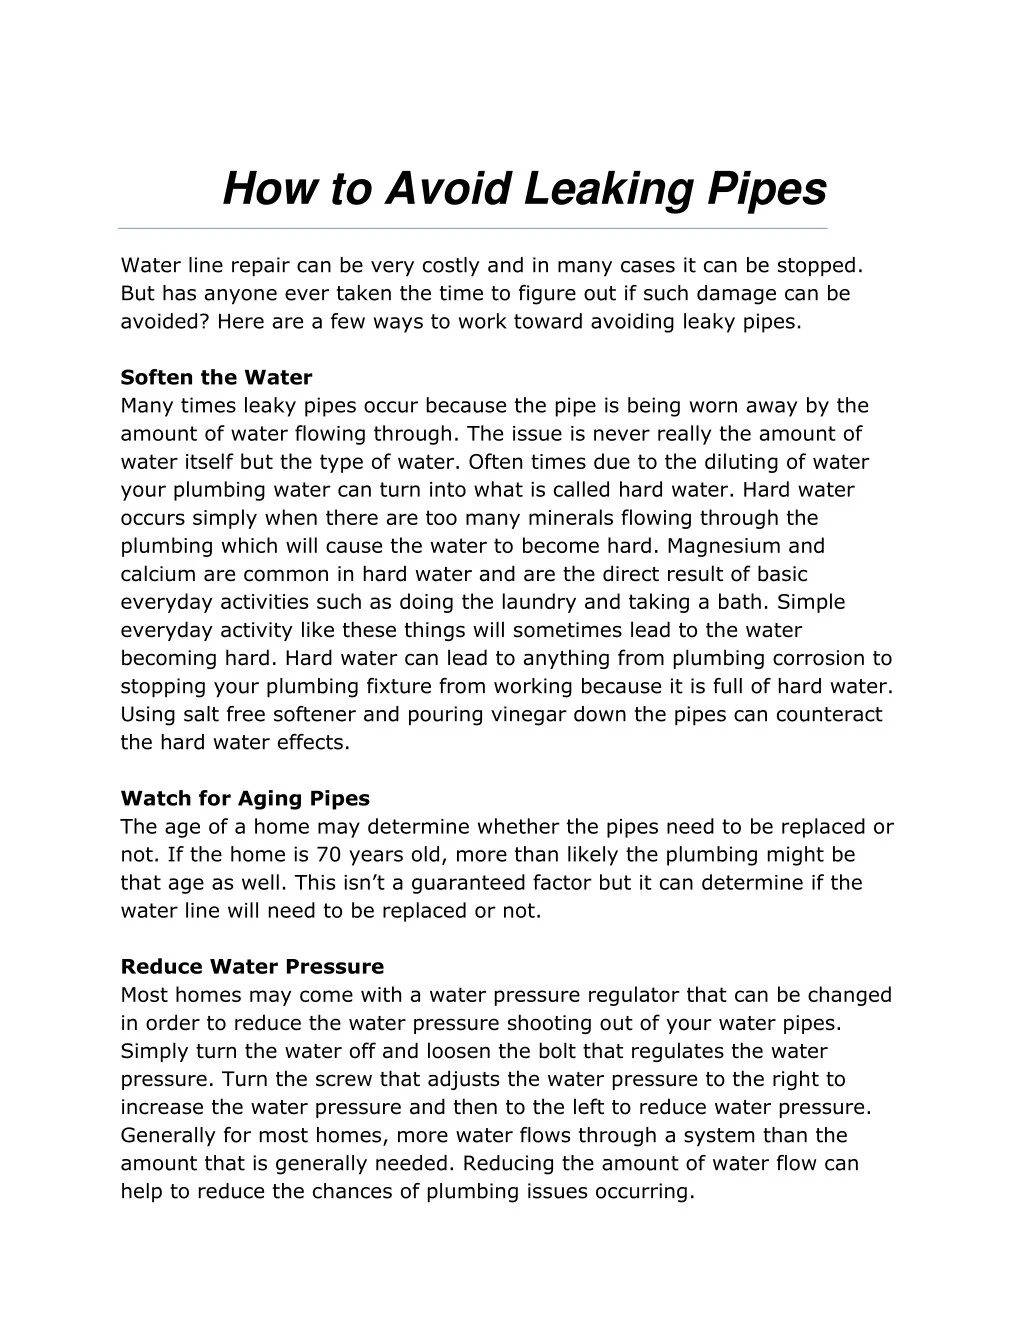 how to avoid leaking pipes